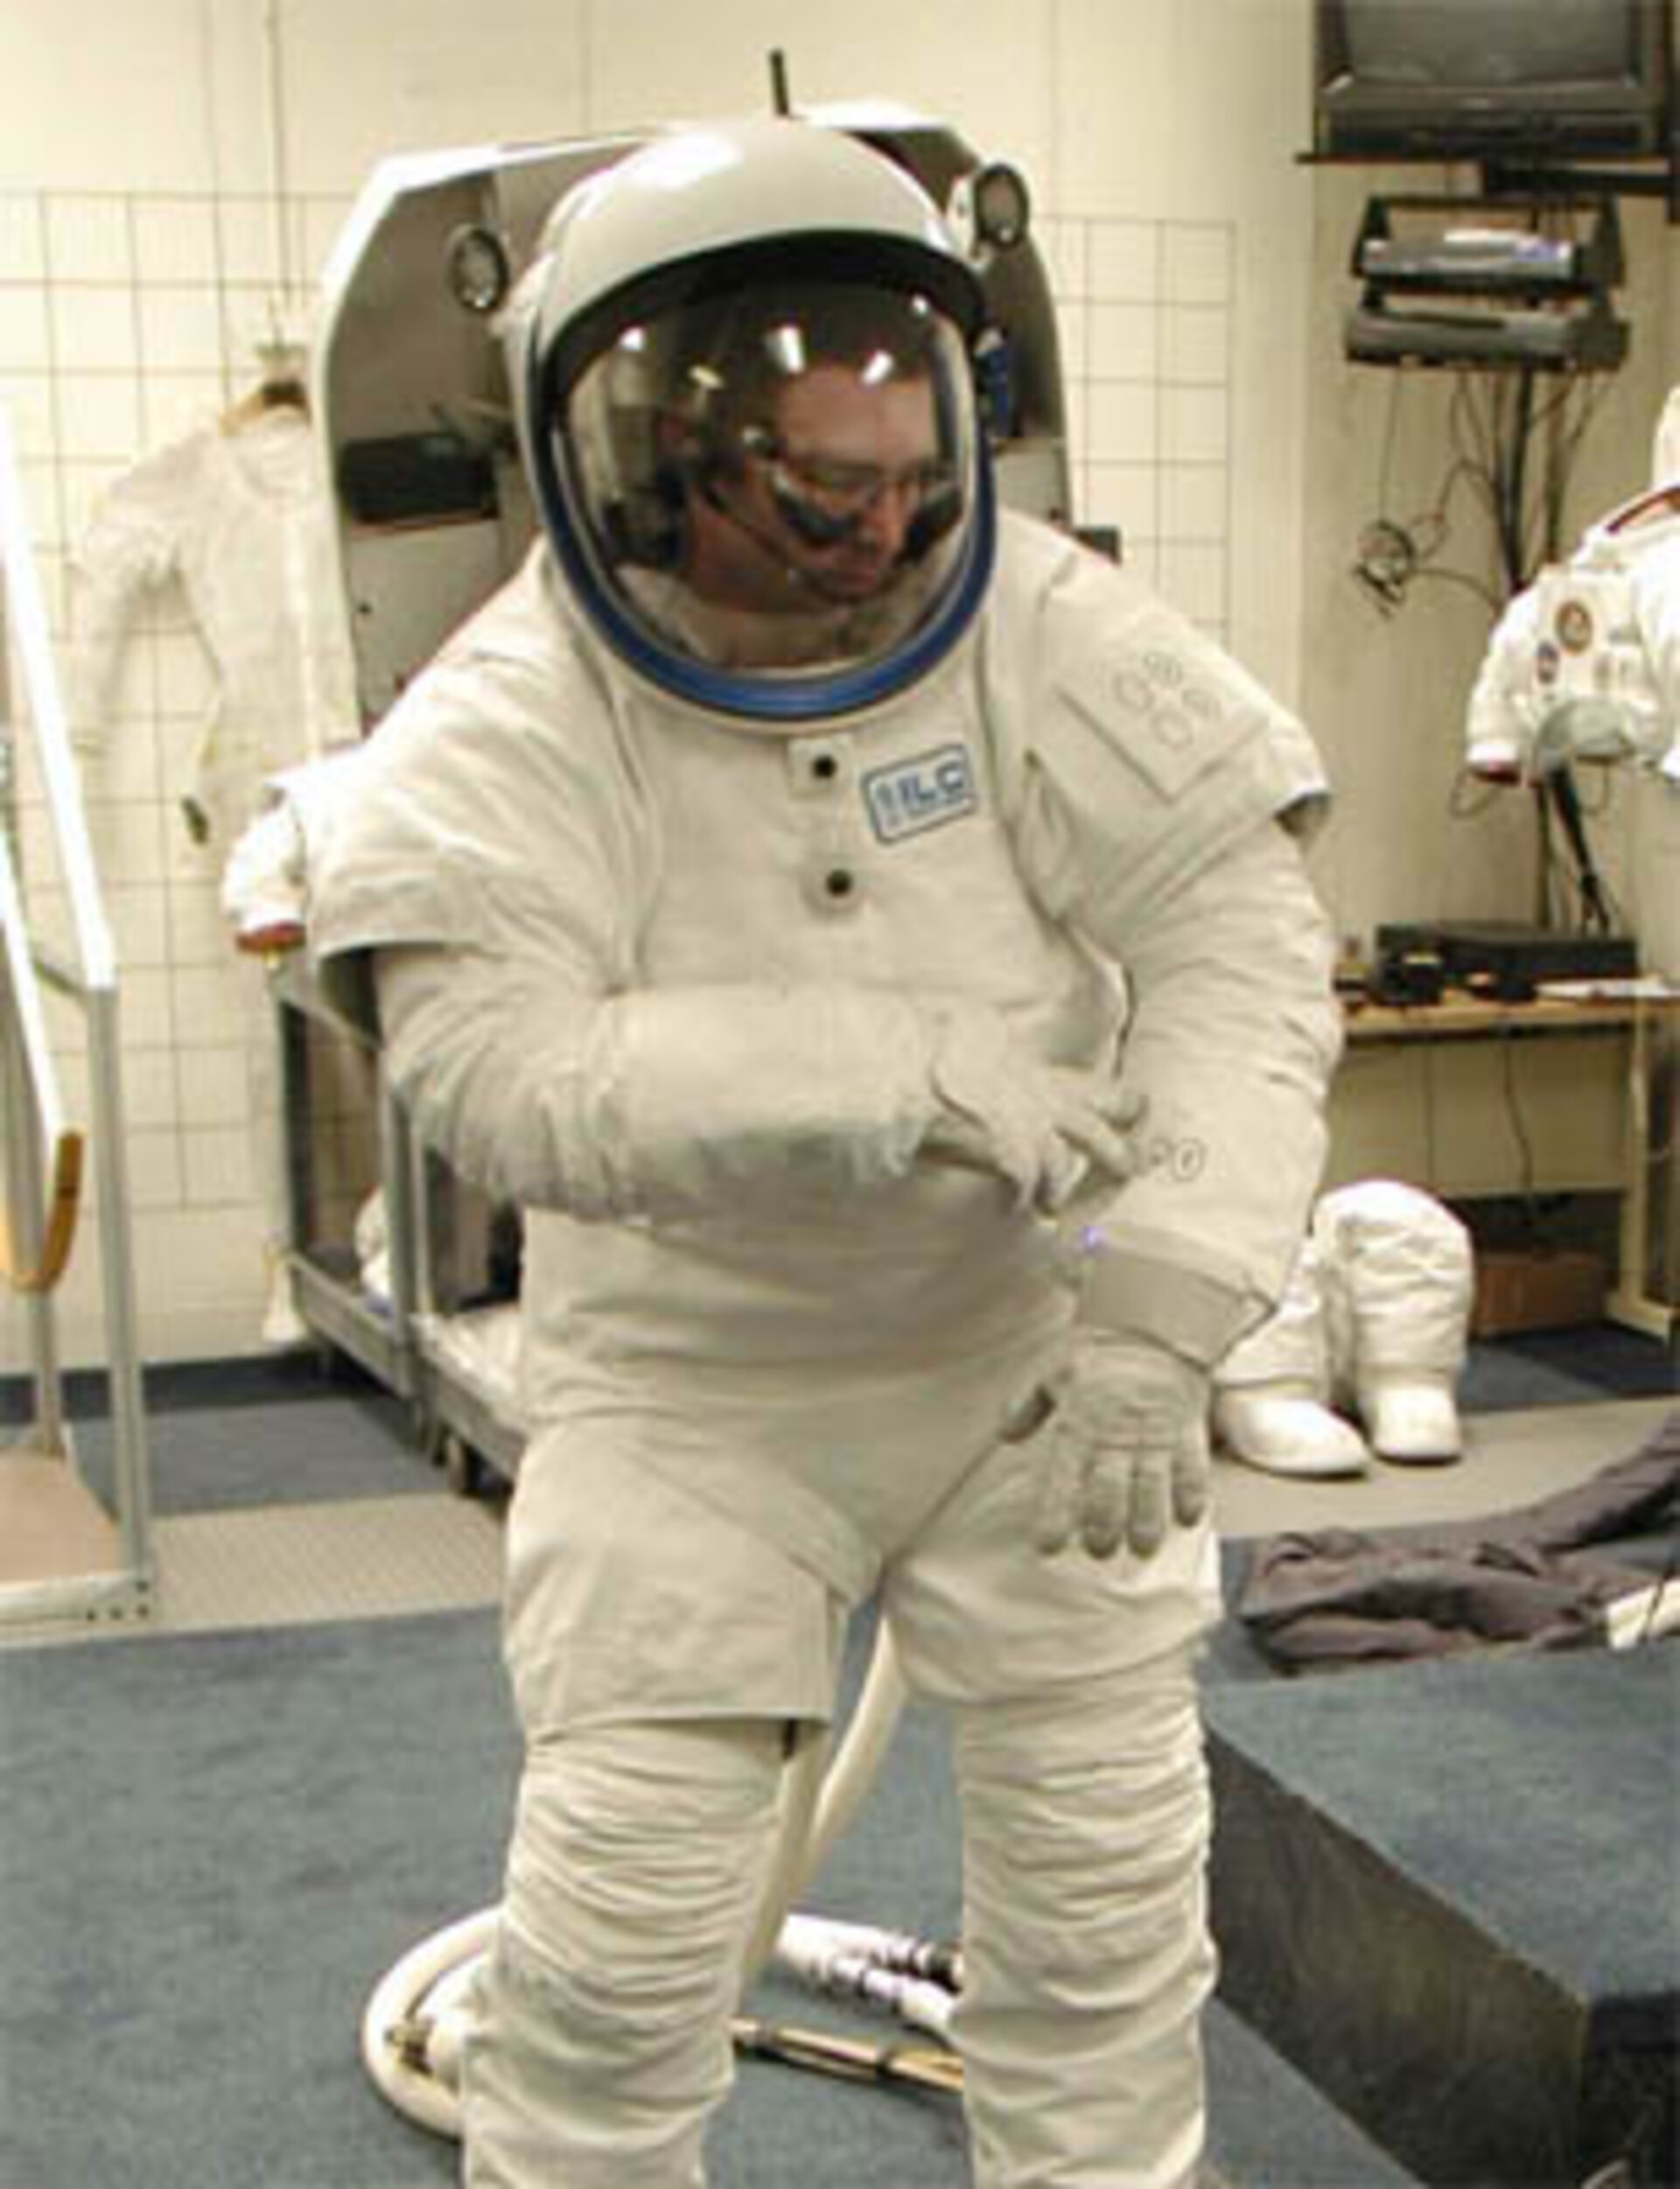 Astronaut suit with QTC switches